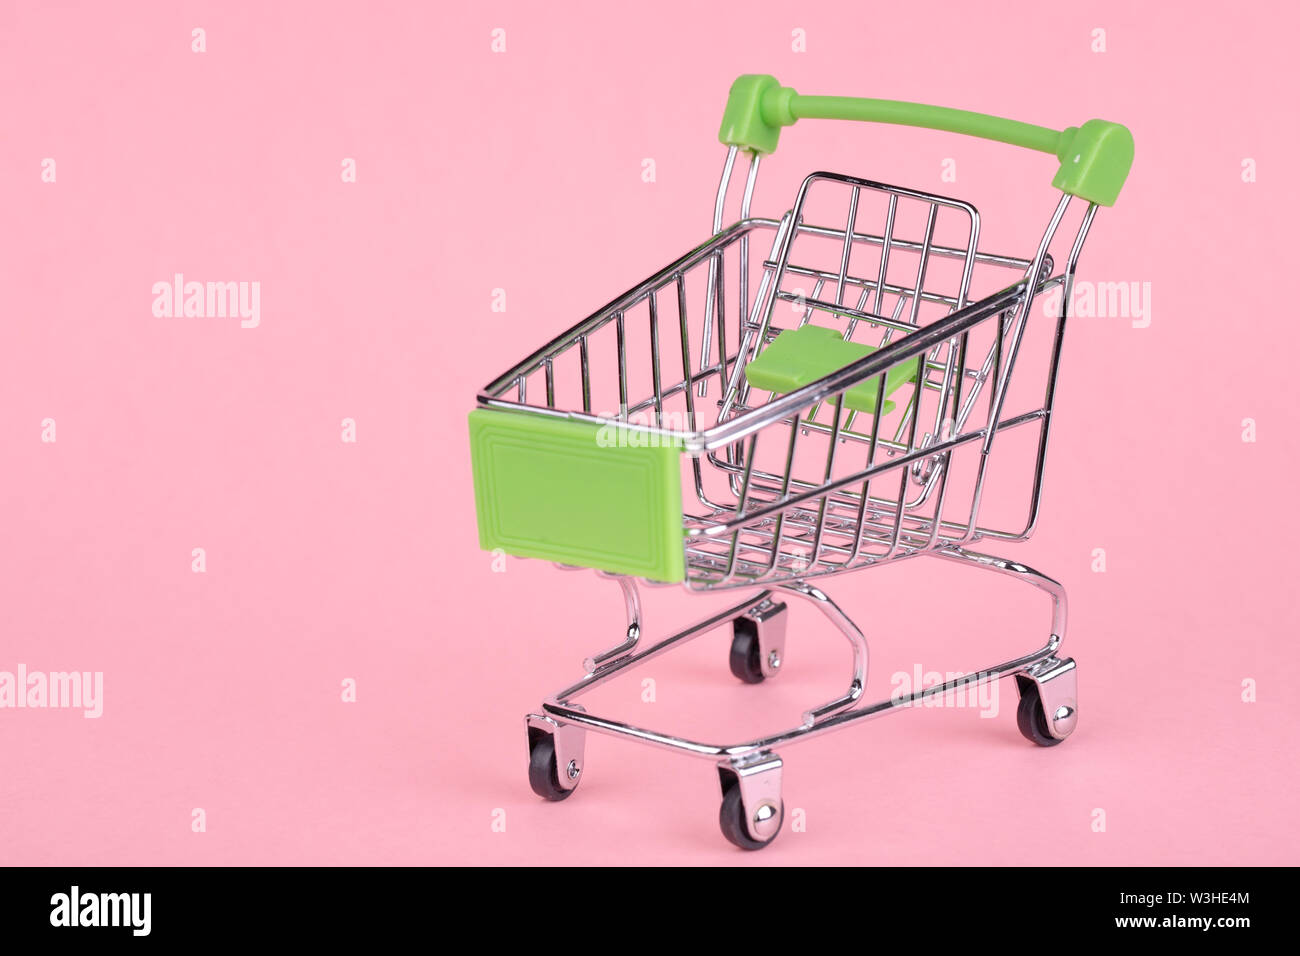 Empty shopping cart on a pink background Stock Photo